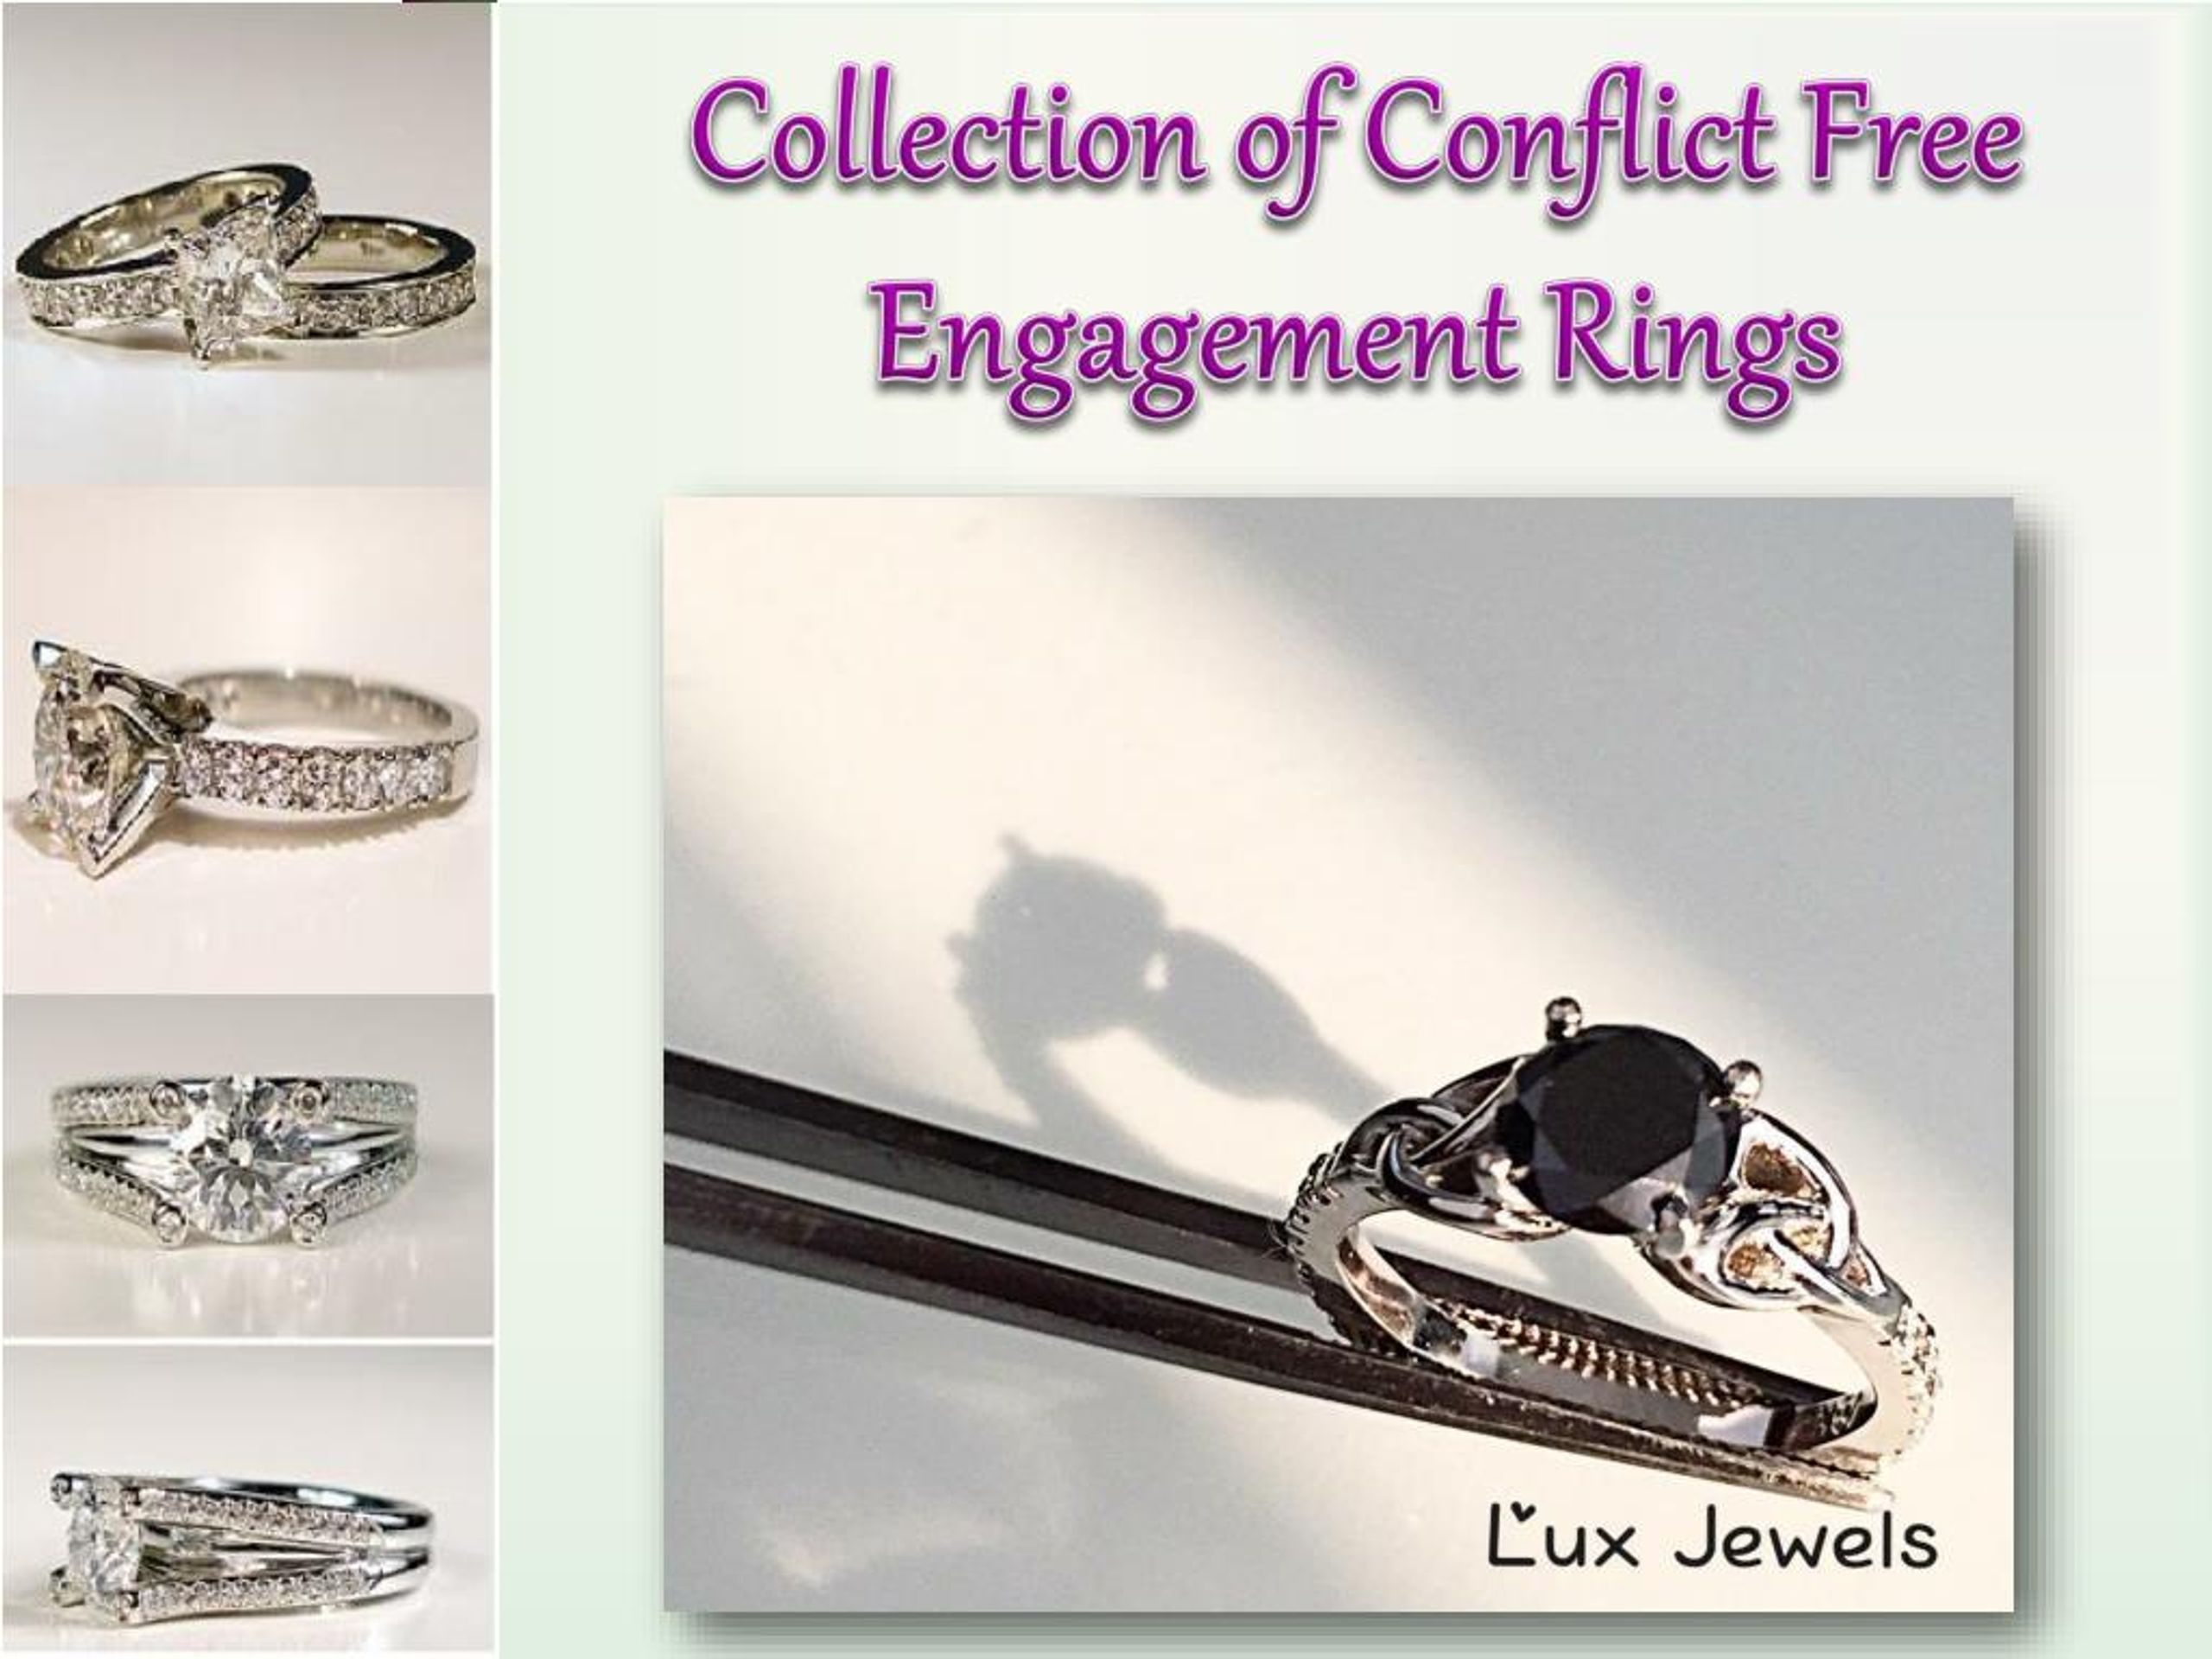 Where to Find Great Conflict-Free Engagement and Wedding Rings | Corinth  Suarez - Miami, Florida Blogger & Influencer